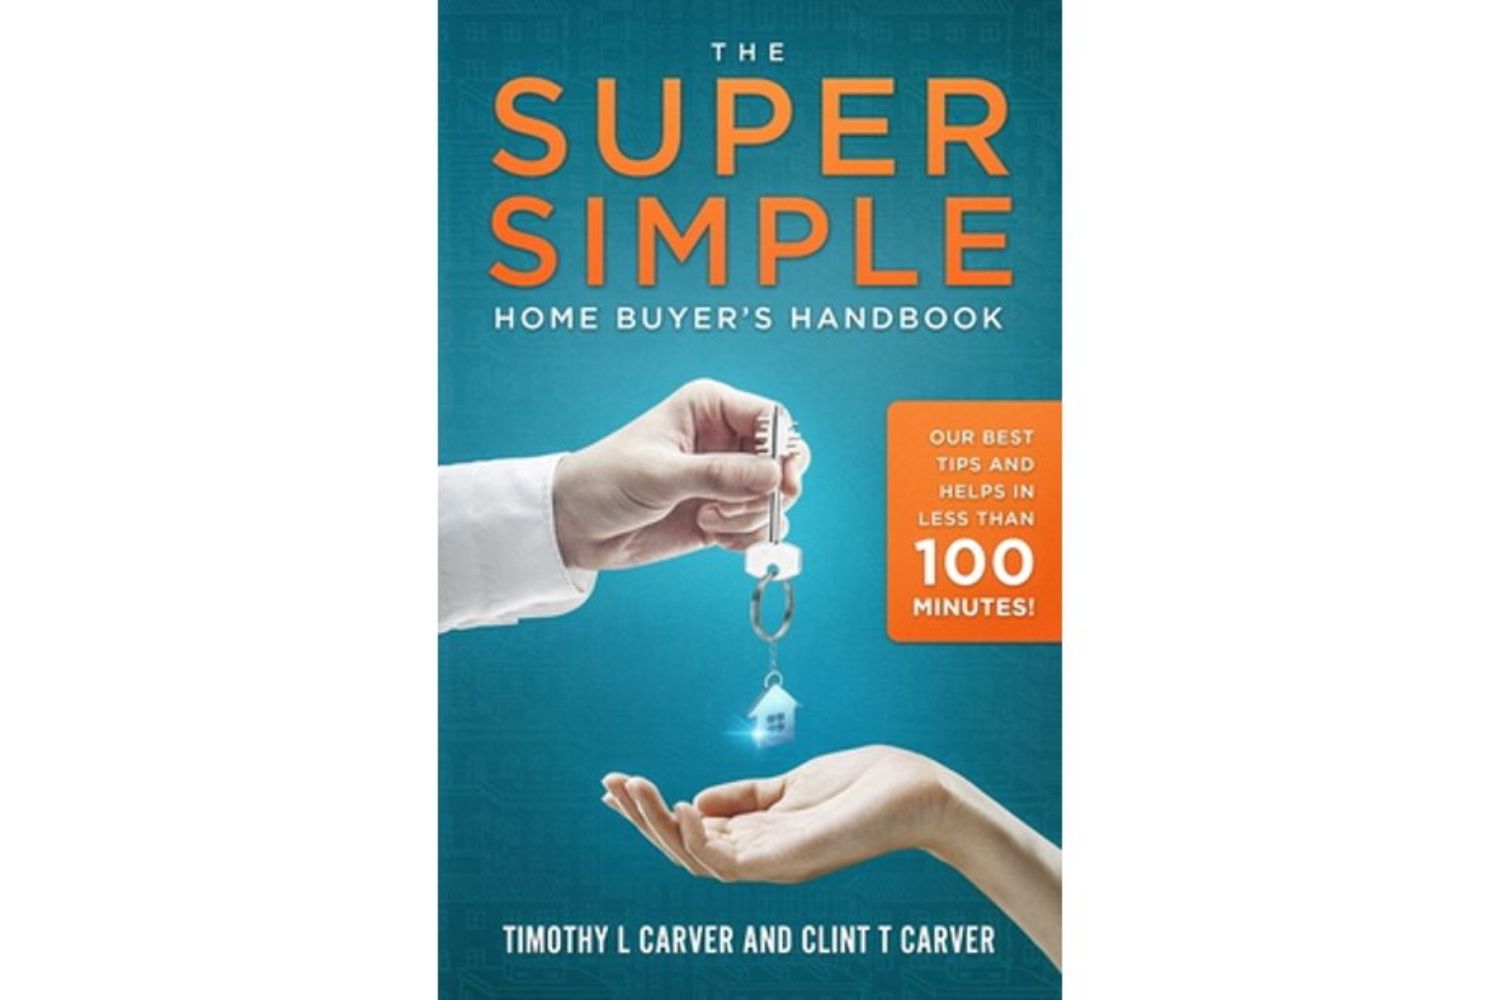 The Best Real Estate Books Options: The Super Simple Home Buyer's Handbook